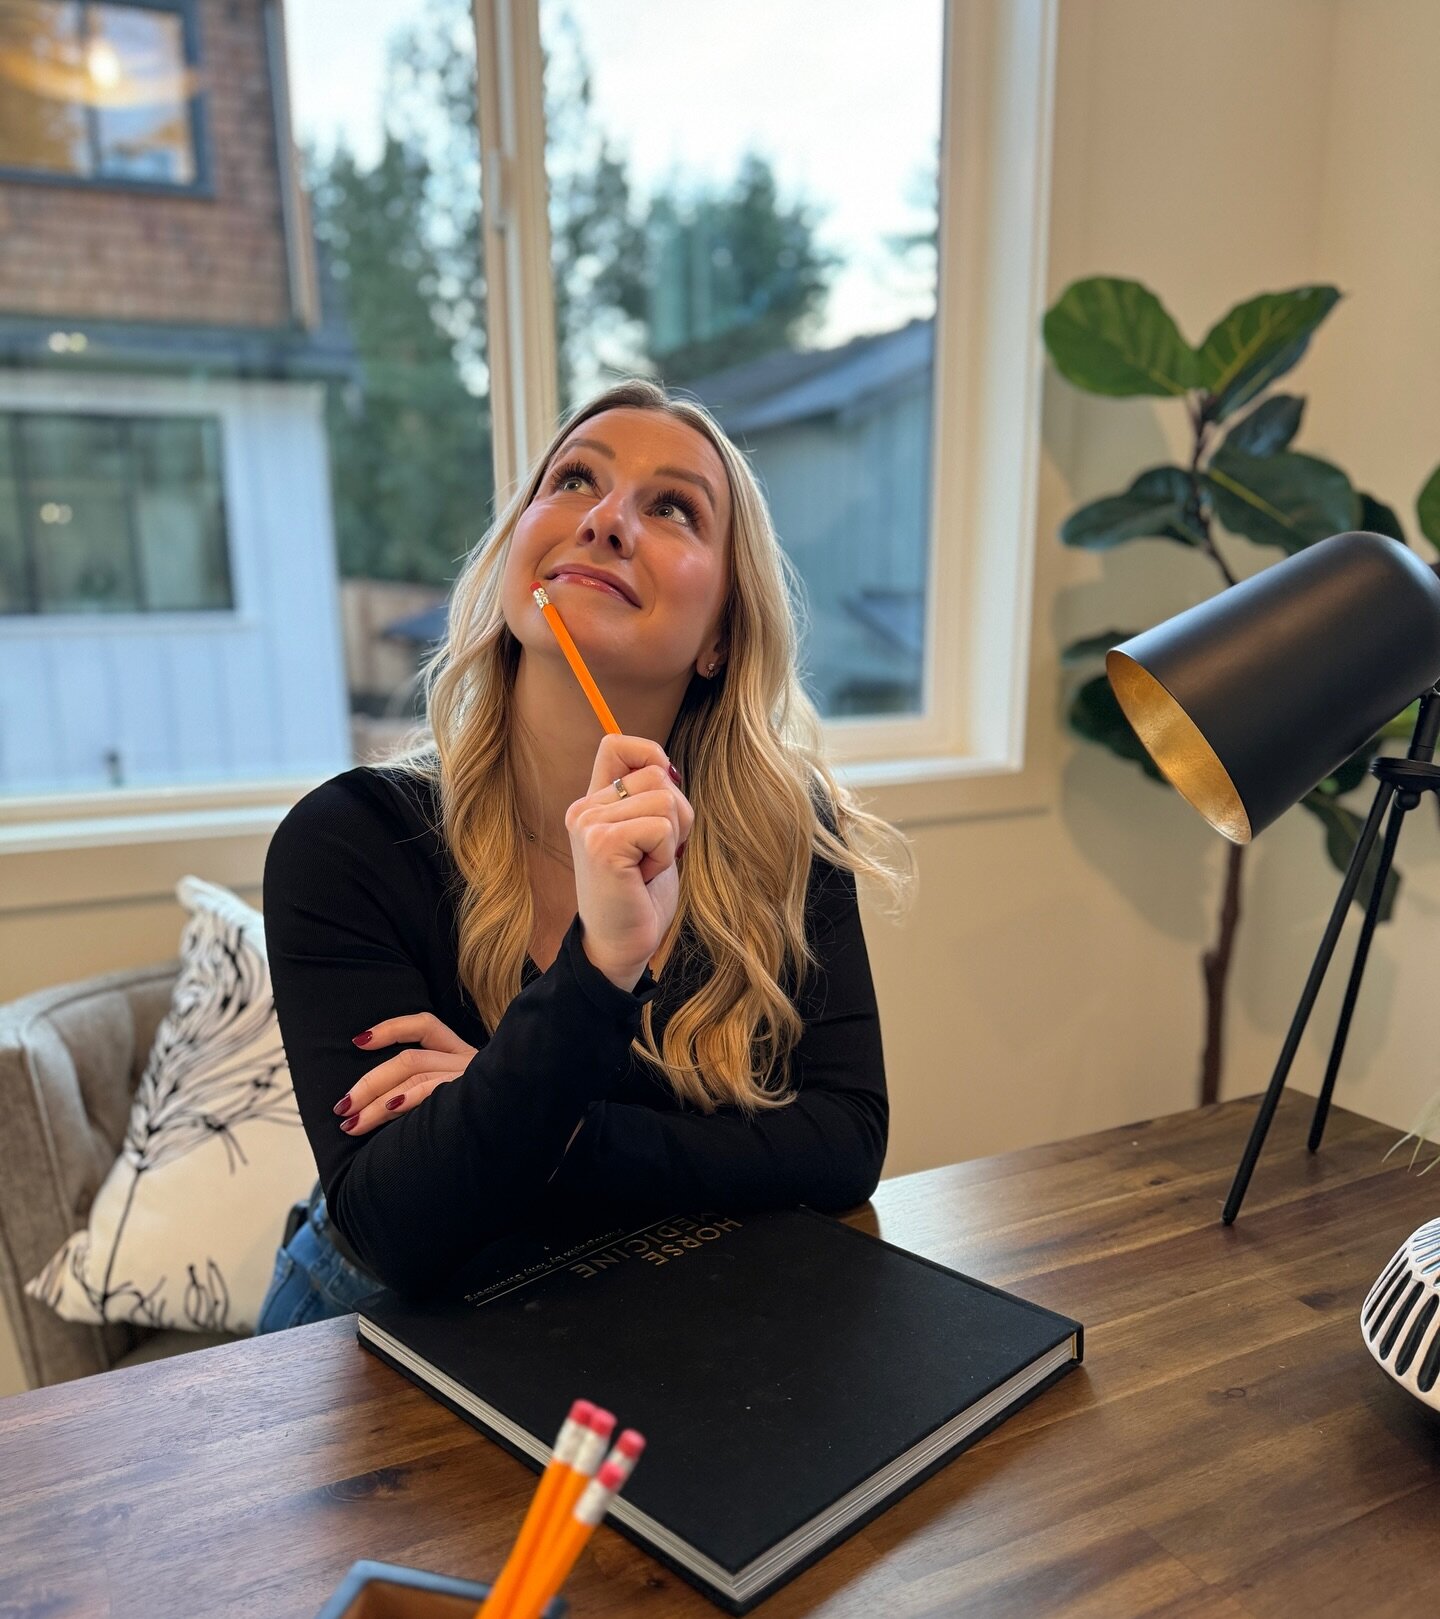 What&rsquo;s one of the most important things to practice during real estate? Whether you&rsquo;re a broker, buyer, or seller&hellip;patience. I was sitting here reviewing my current transactions and in particular 2 different buyers in escrow&hellip;